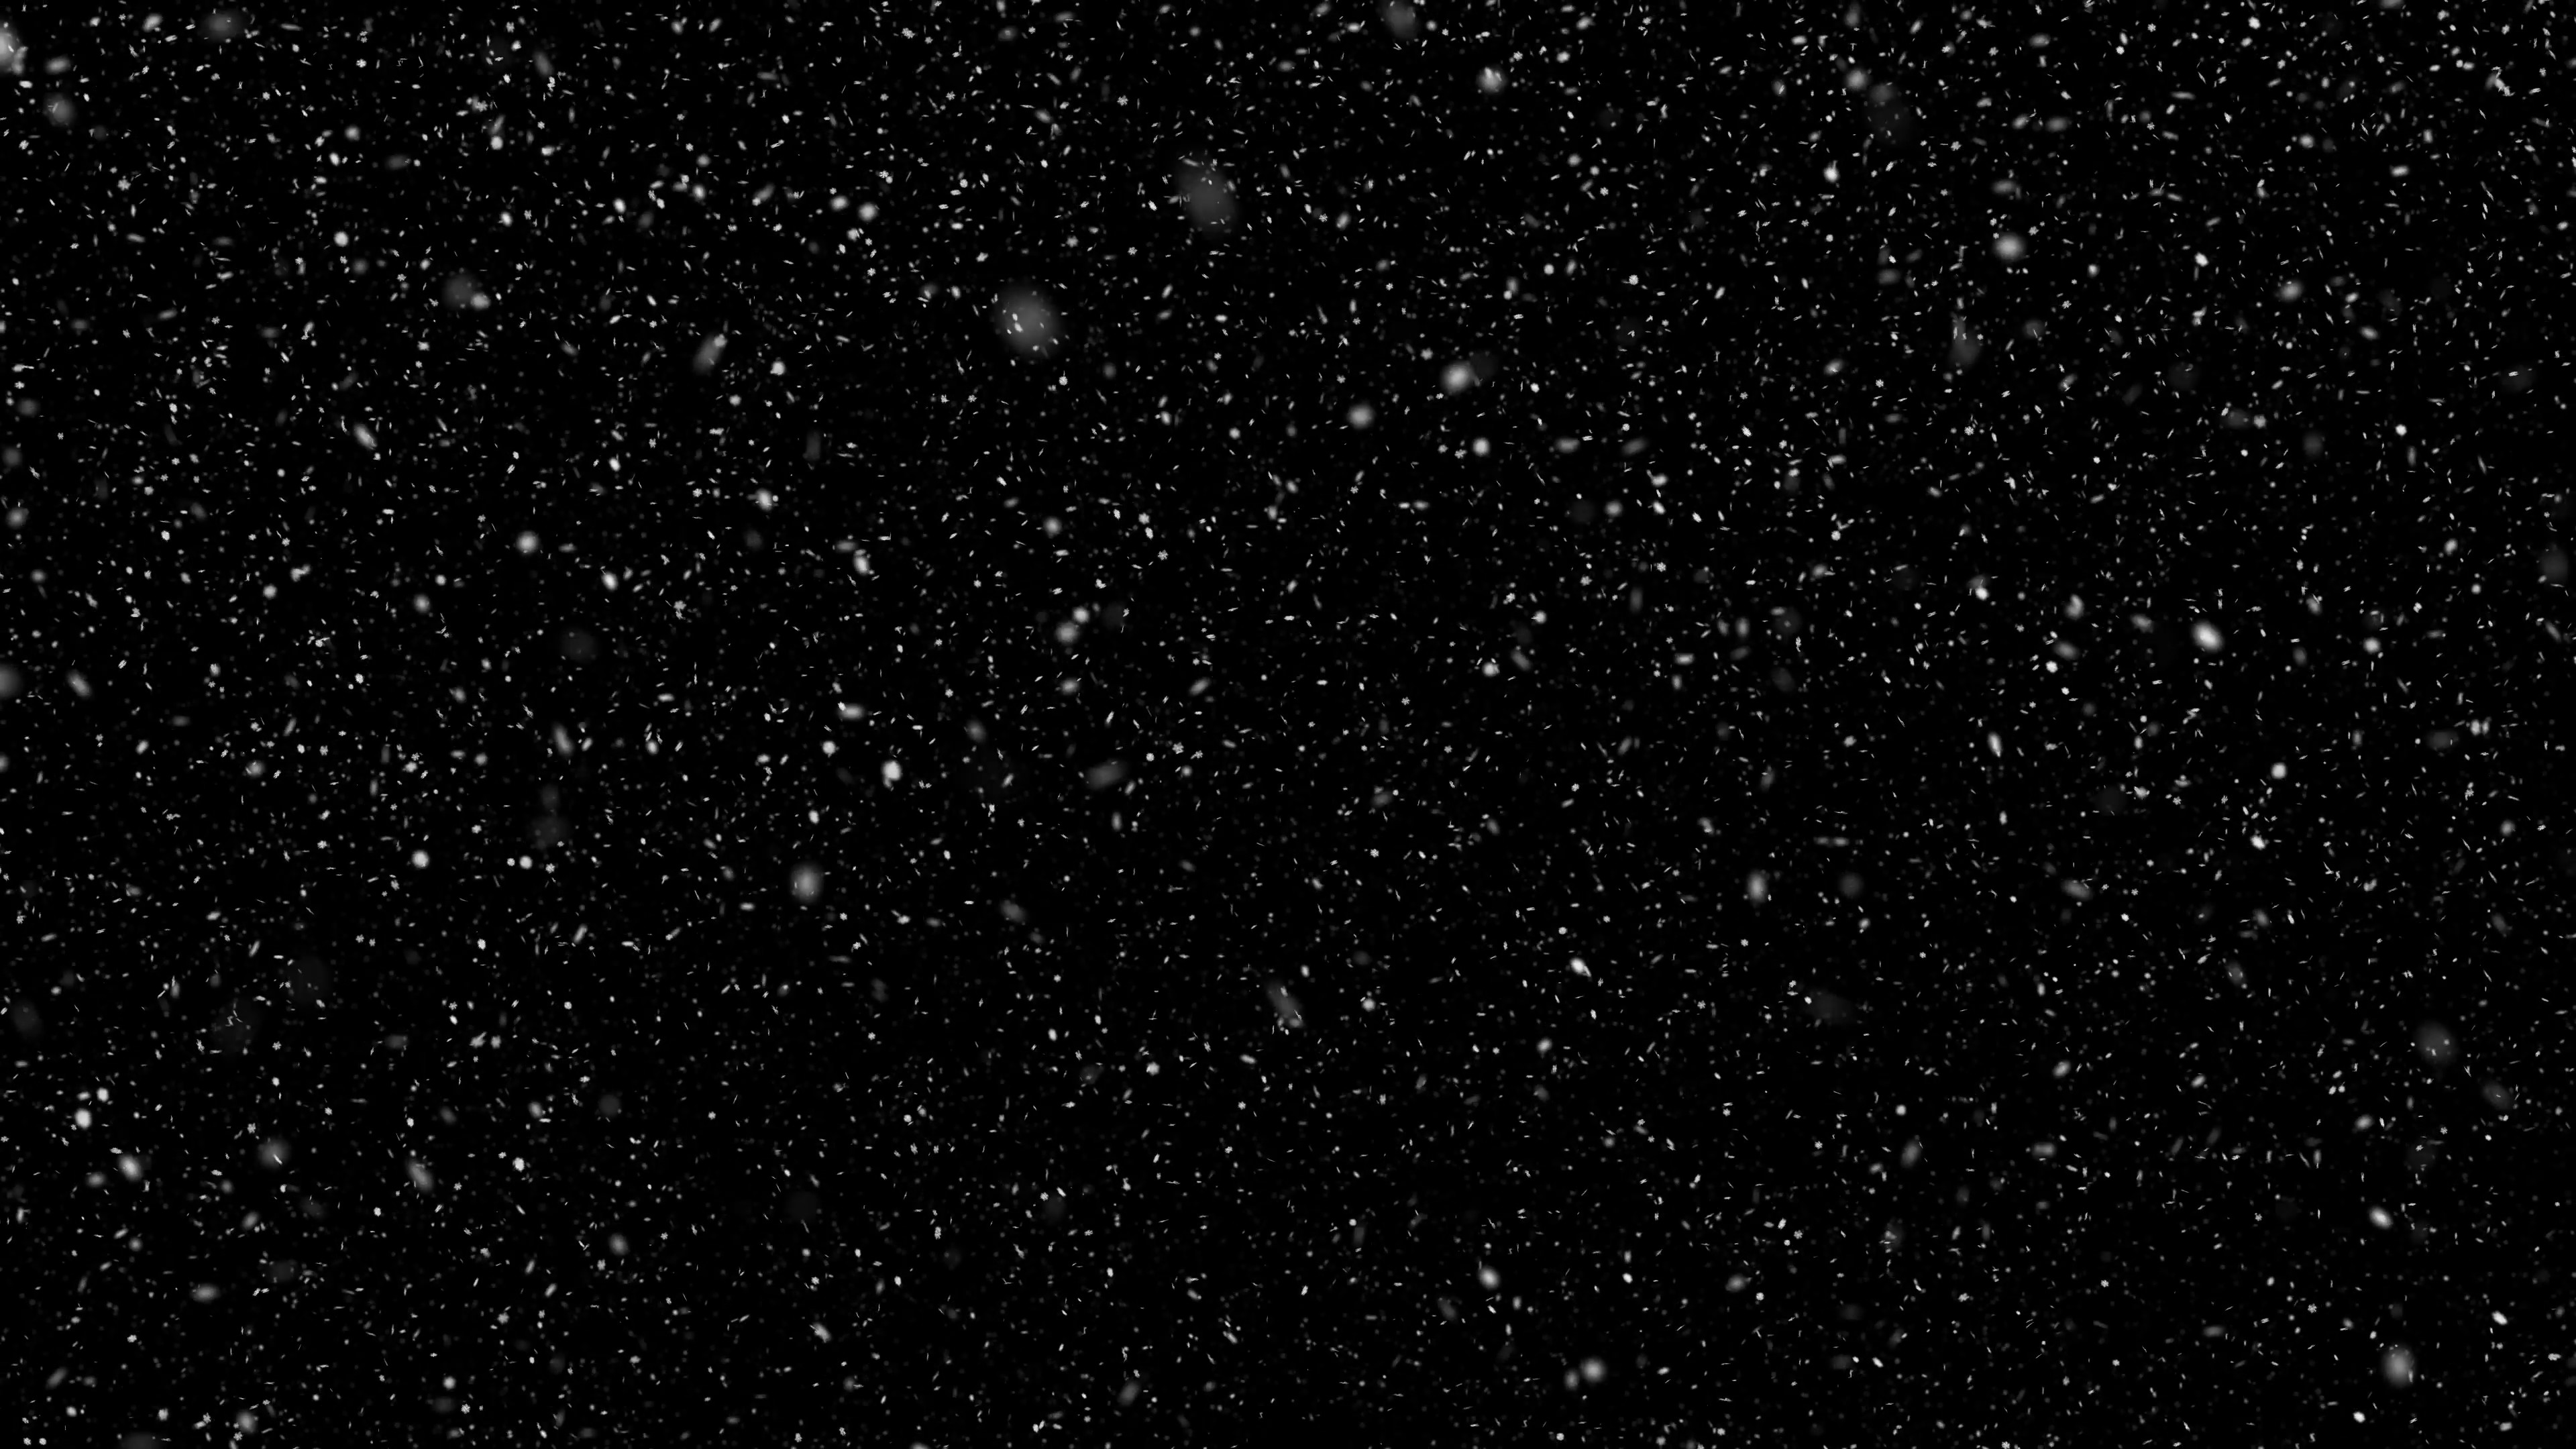 3840x2160 This is realistic animation of detailed very large snow flakes in